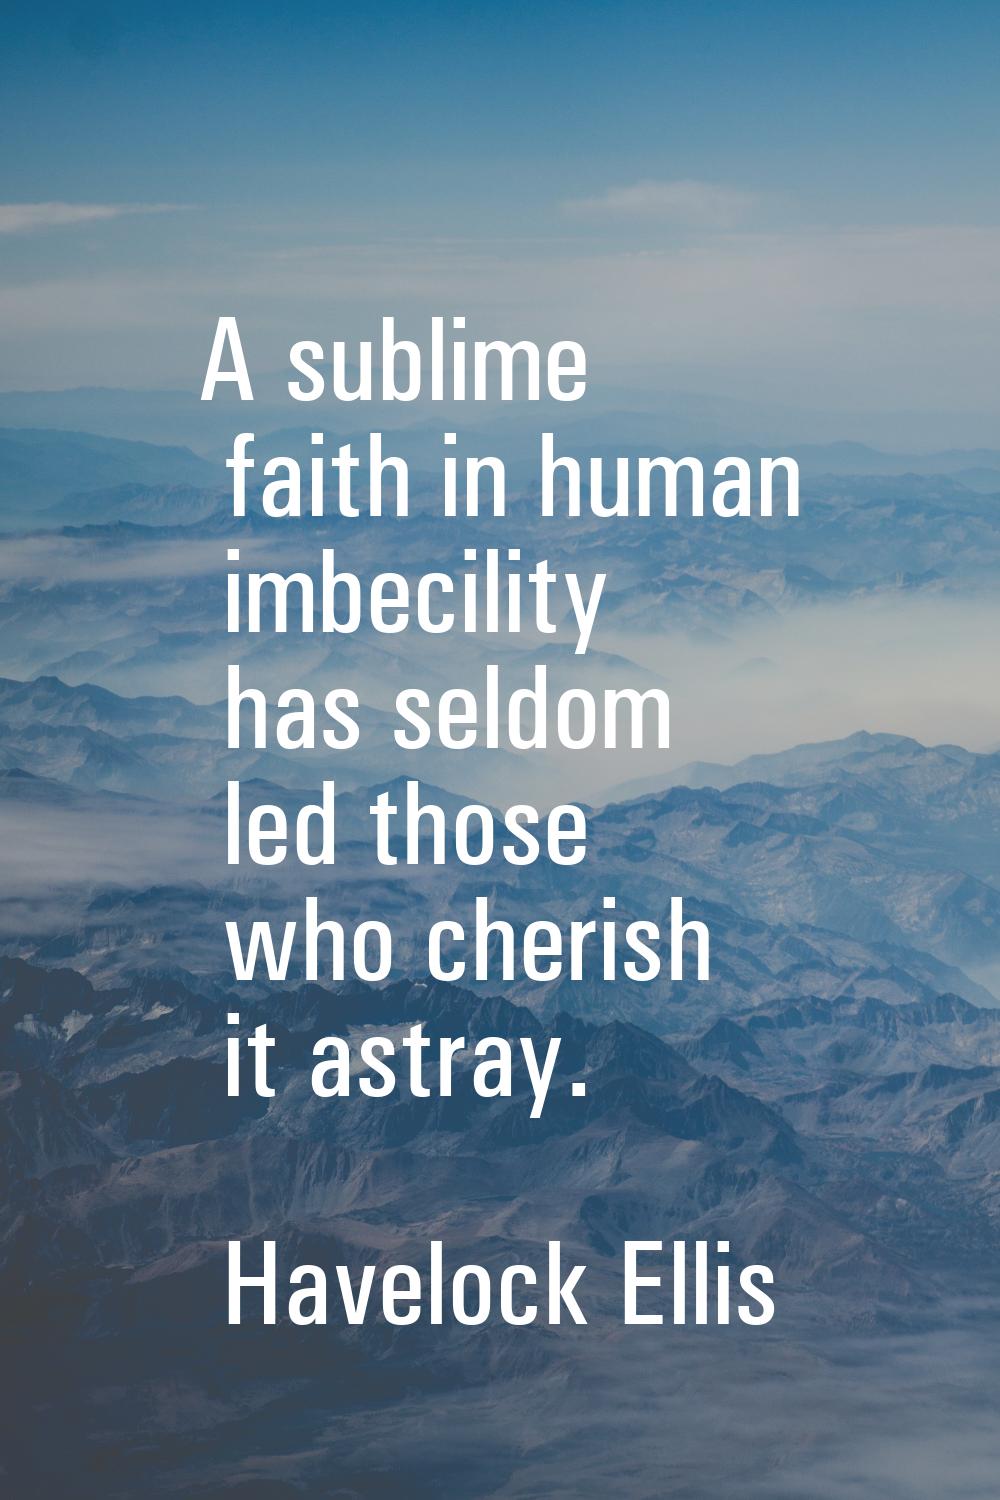 A sublime faith in human imbecility has seldom led those who cherish it astray.